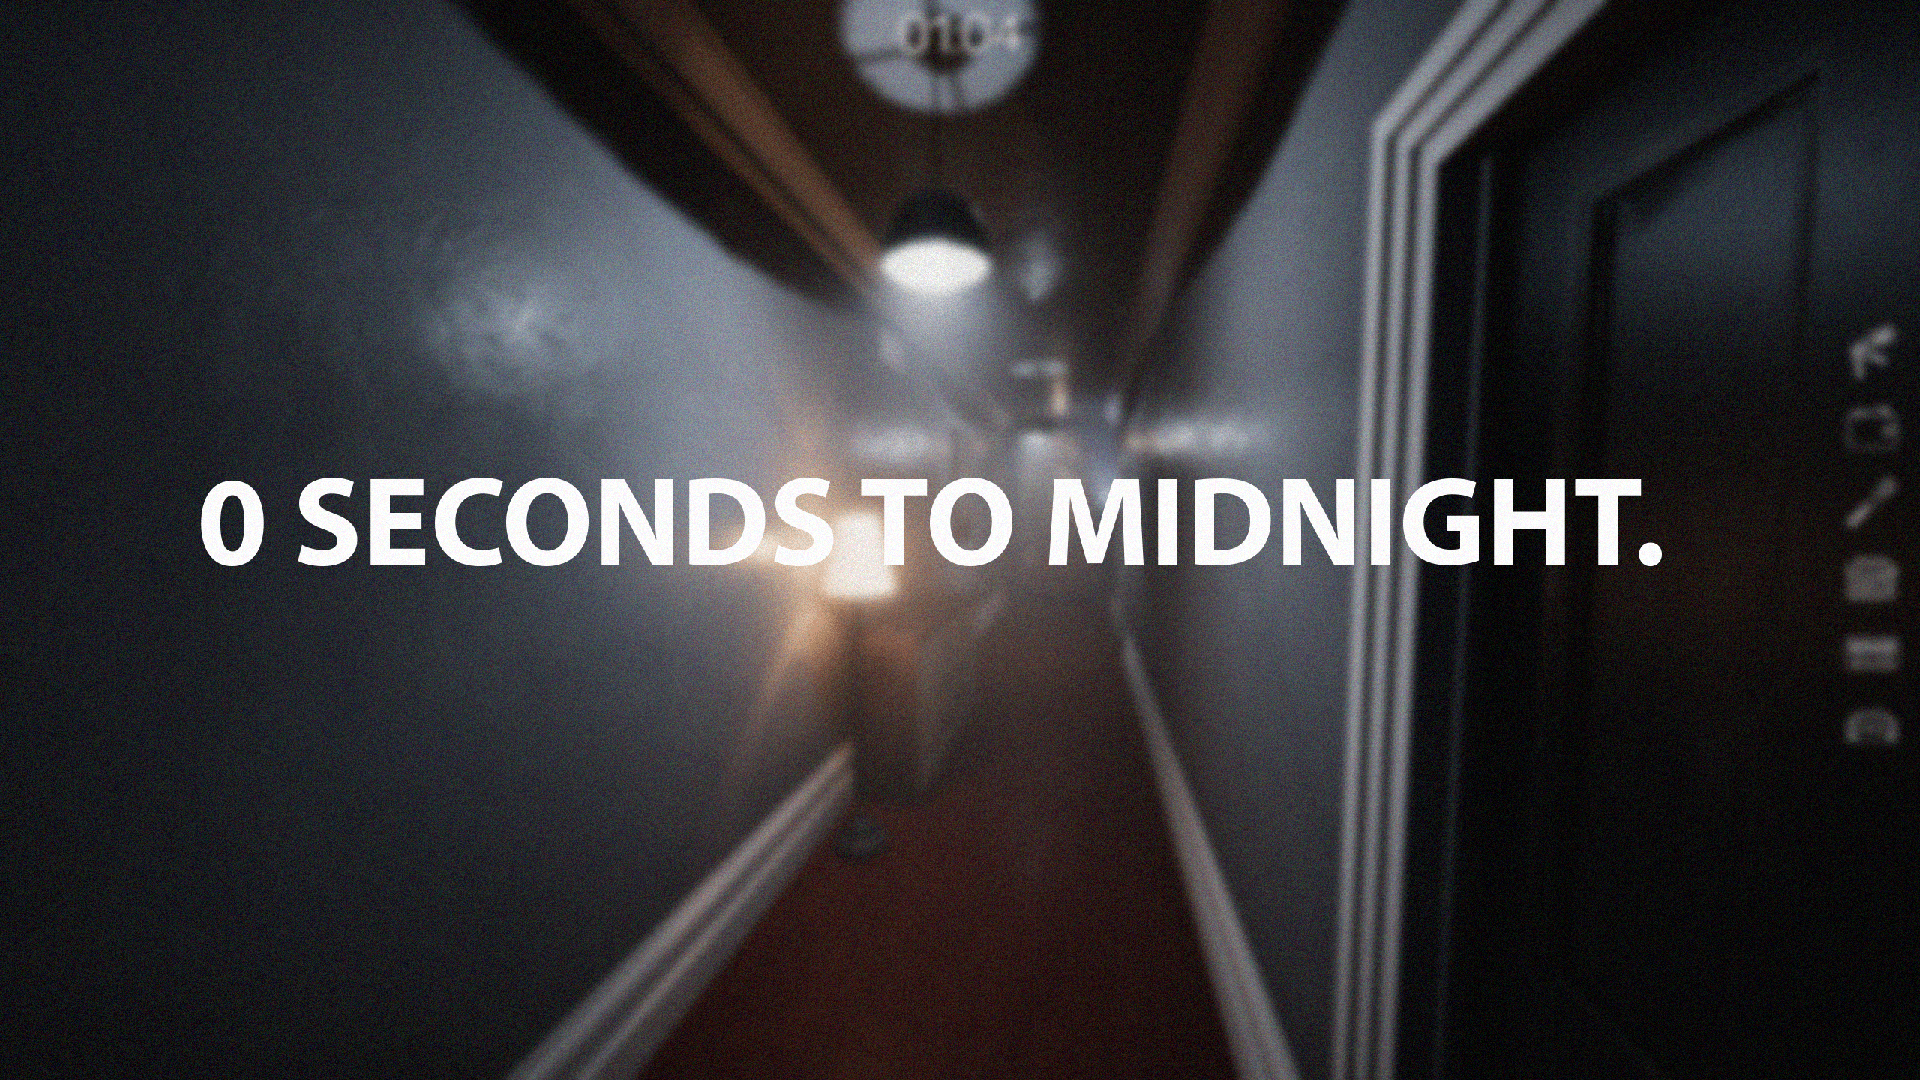 0 Seconds to Midnight.